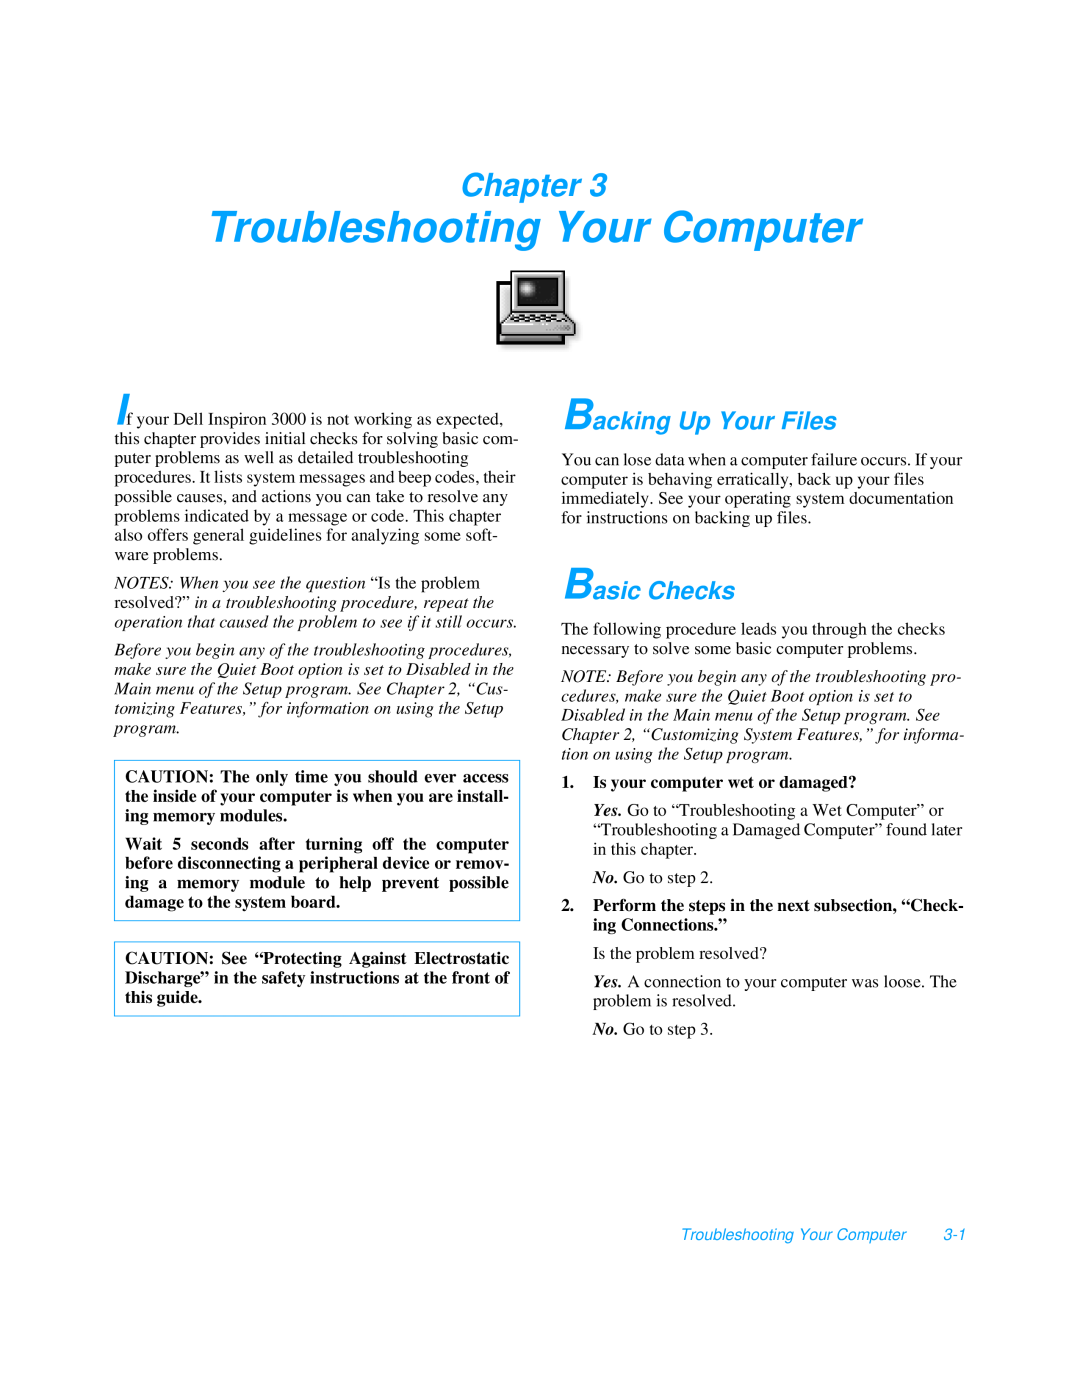 Dell 3000 manual Troubleshooting Your Computer, Backing Up Your Files, Basic Checks, Chapter 